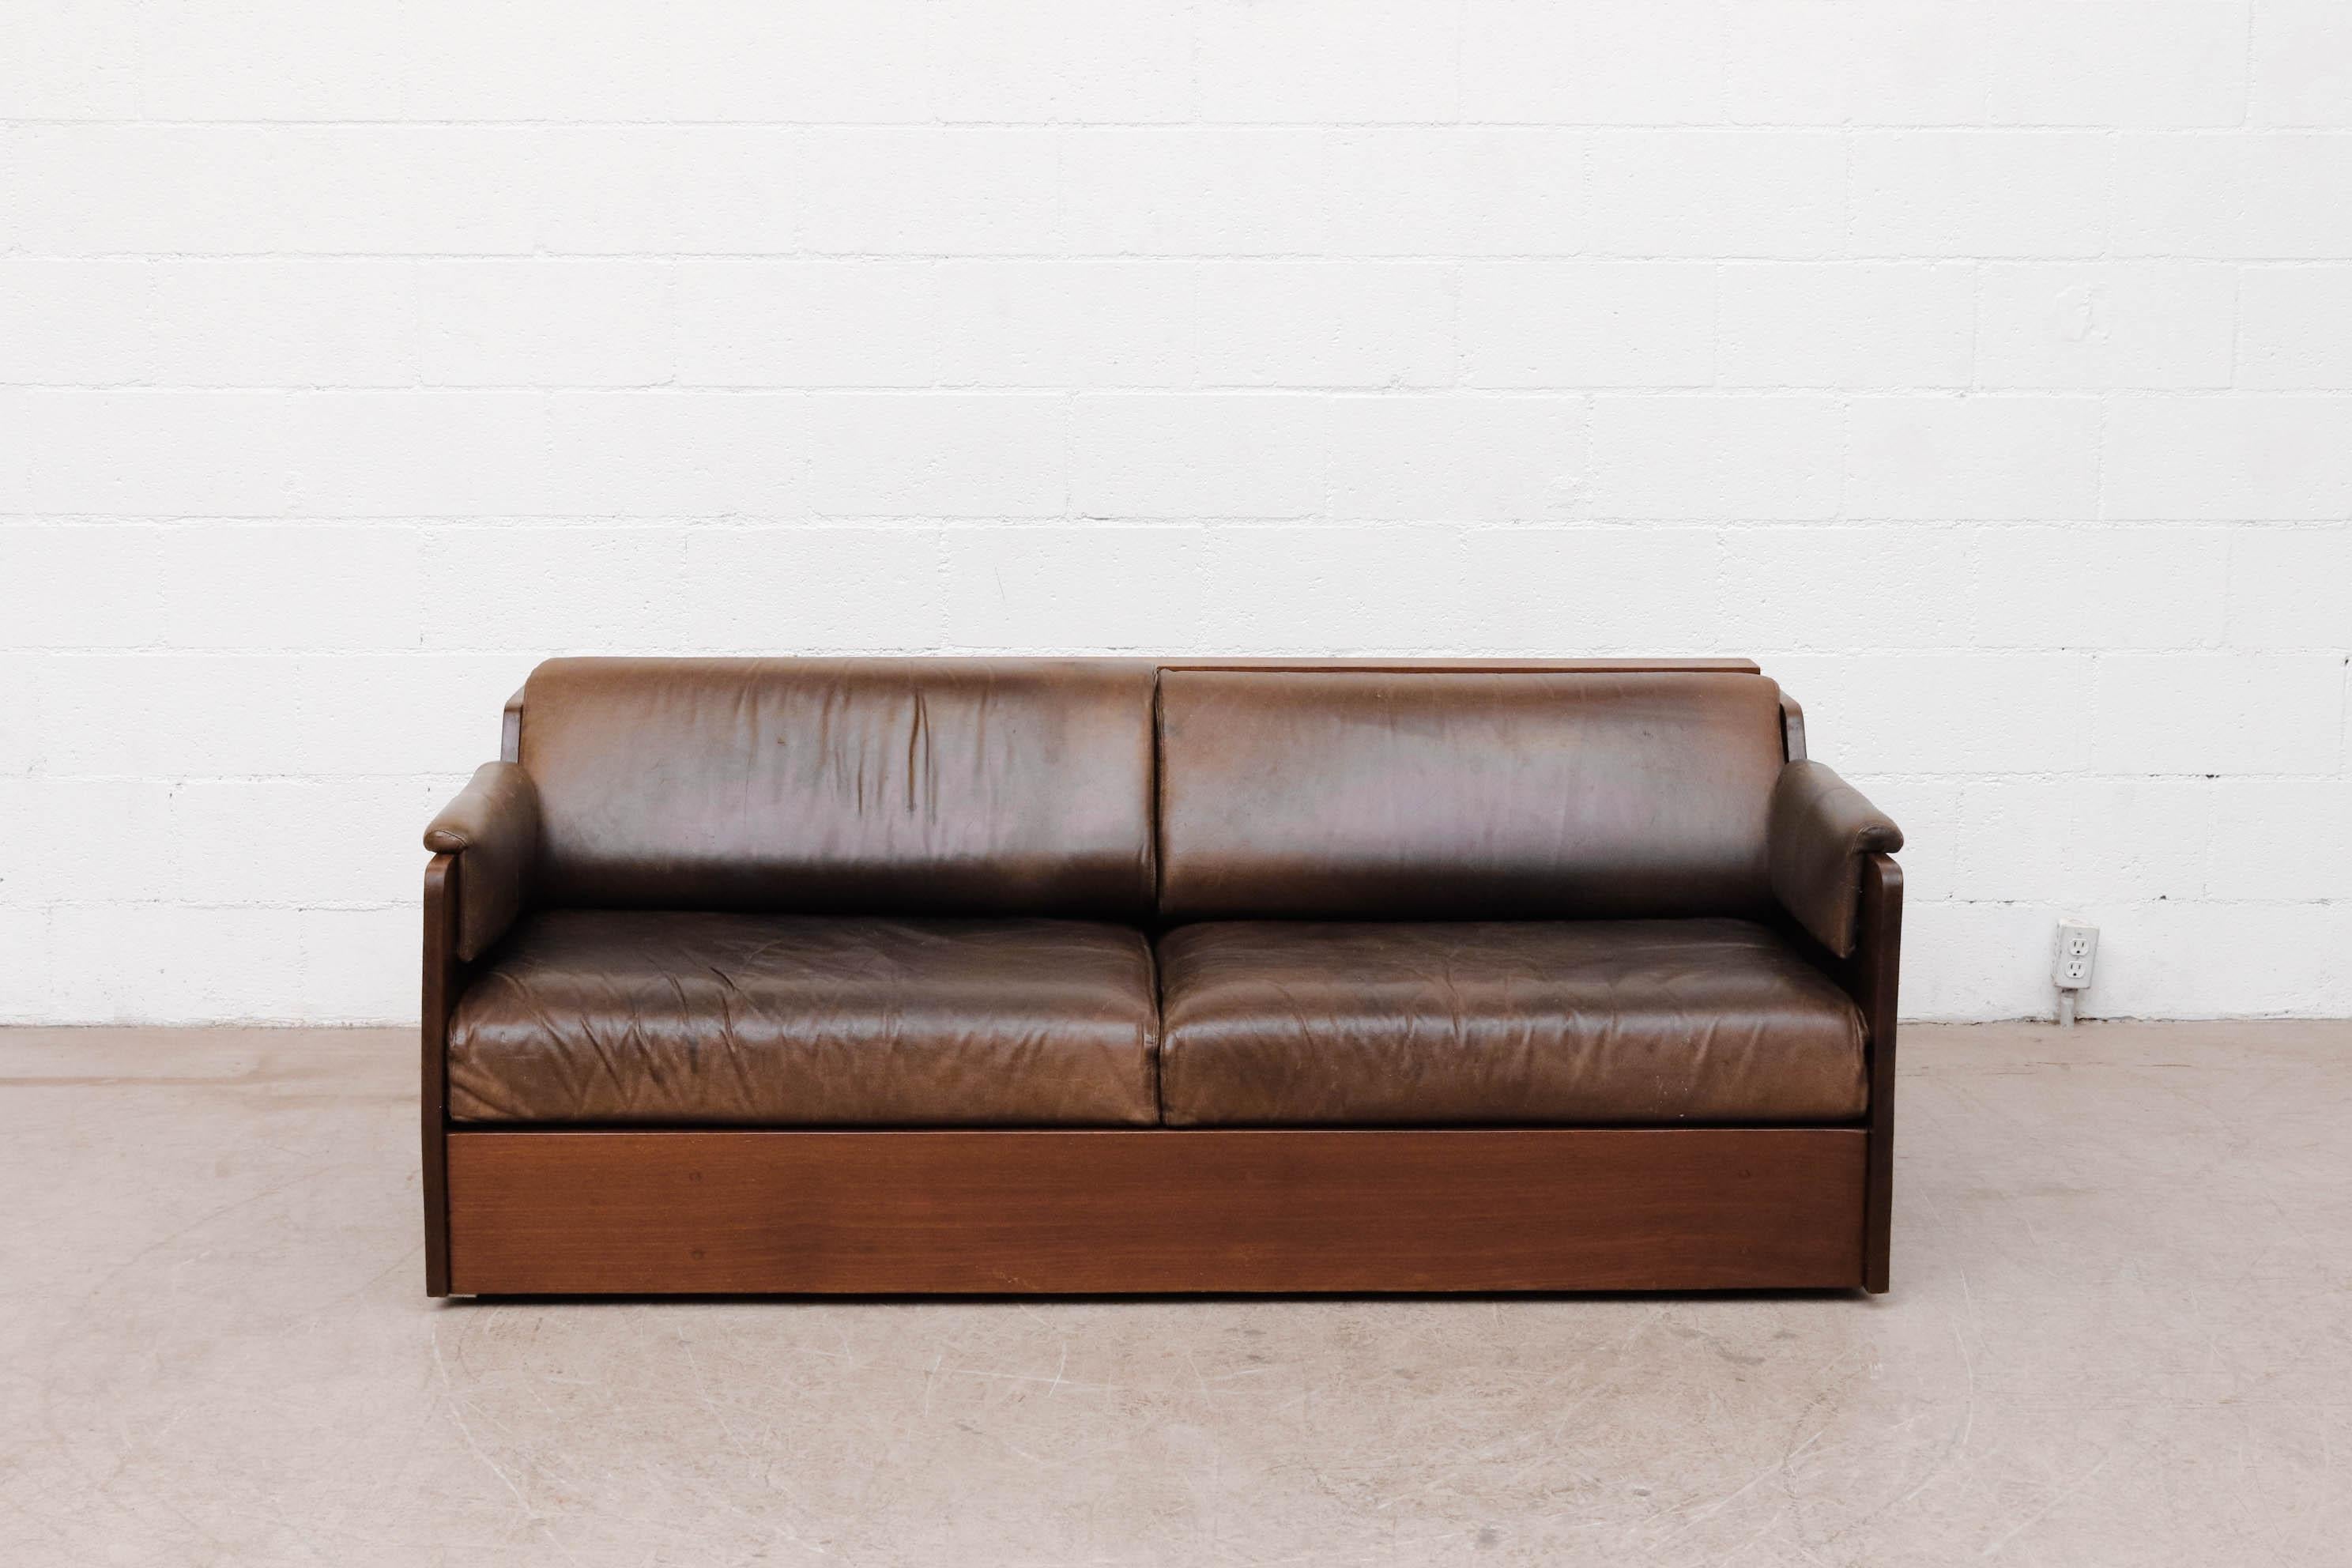 Ate van Apeldoorn Solid Iroko wood loveseat. Iroko wood is also known as African teak. It is an extremely heavy solid wood sofa. The loveseat has leather cushions and headrest cushions can velcro off. European outlet built in. Frame and leather are